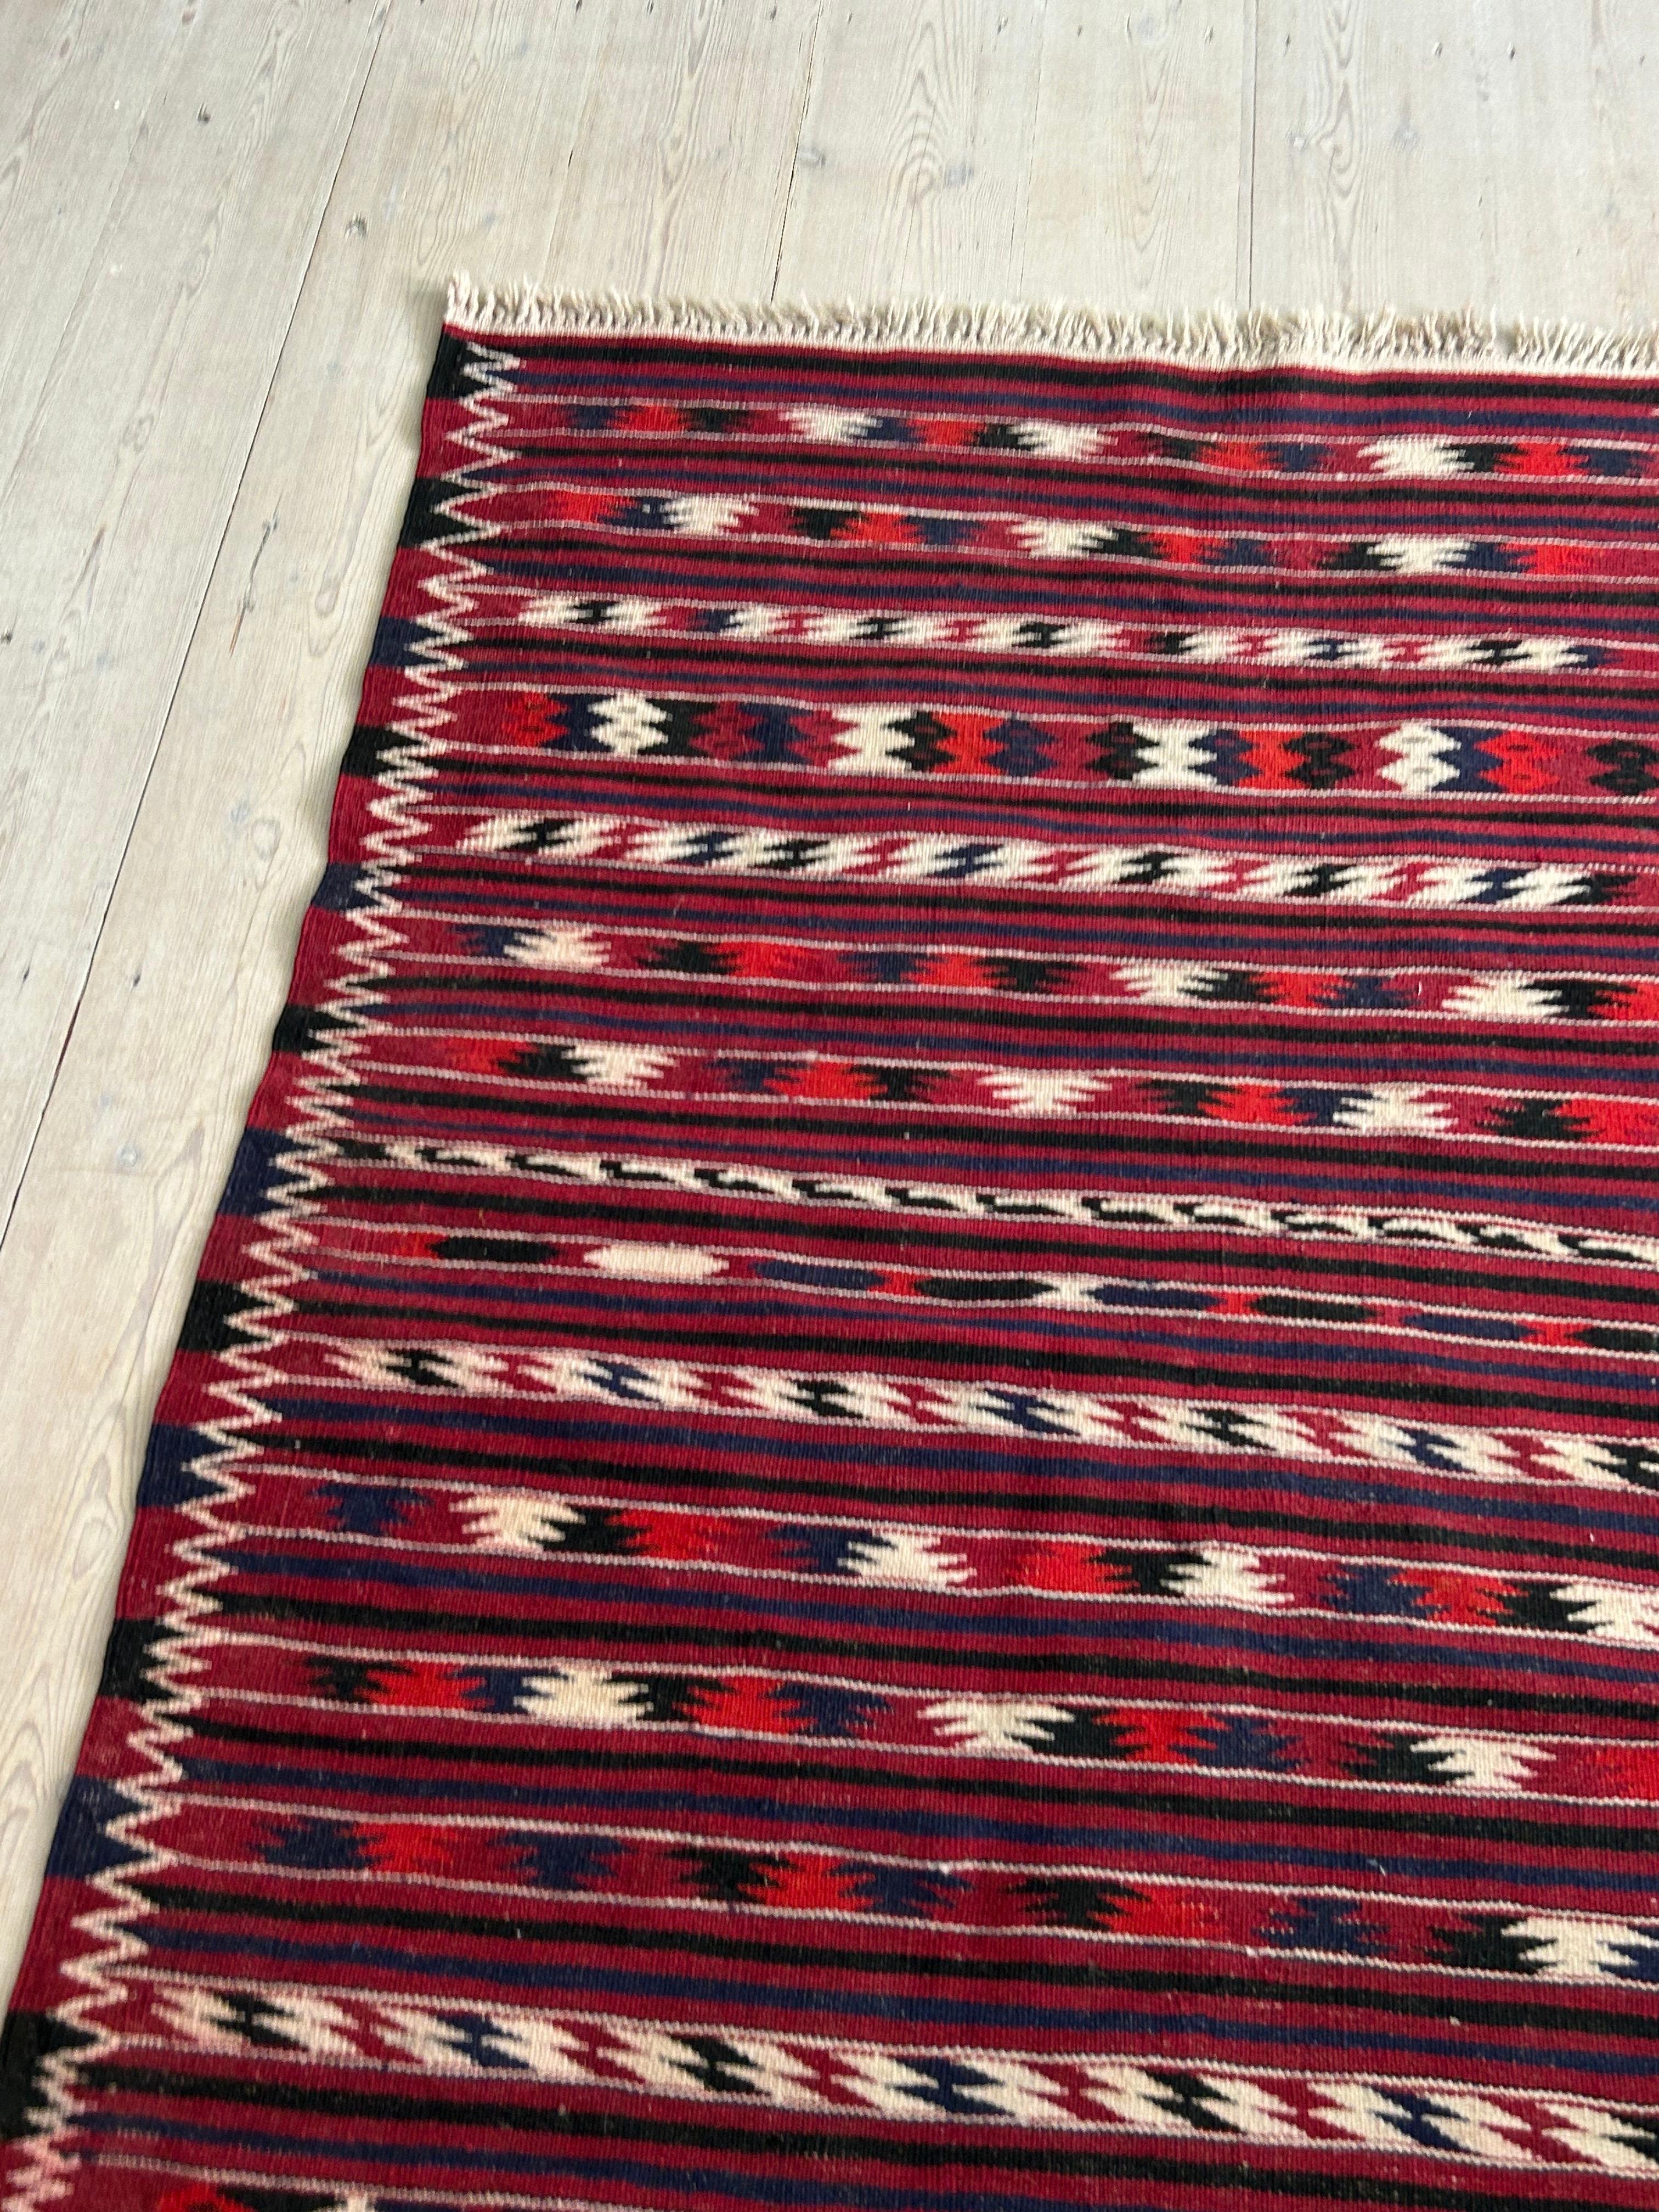 Vintage Hand-Woven Oriental Red Striped Kelim Rug, 20th Century For Sale 1